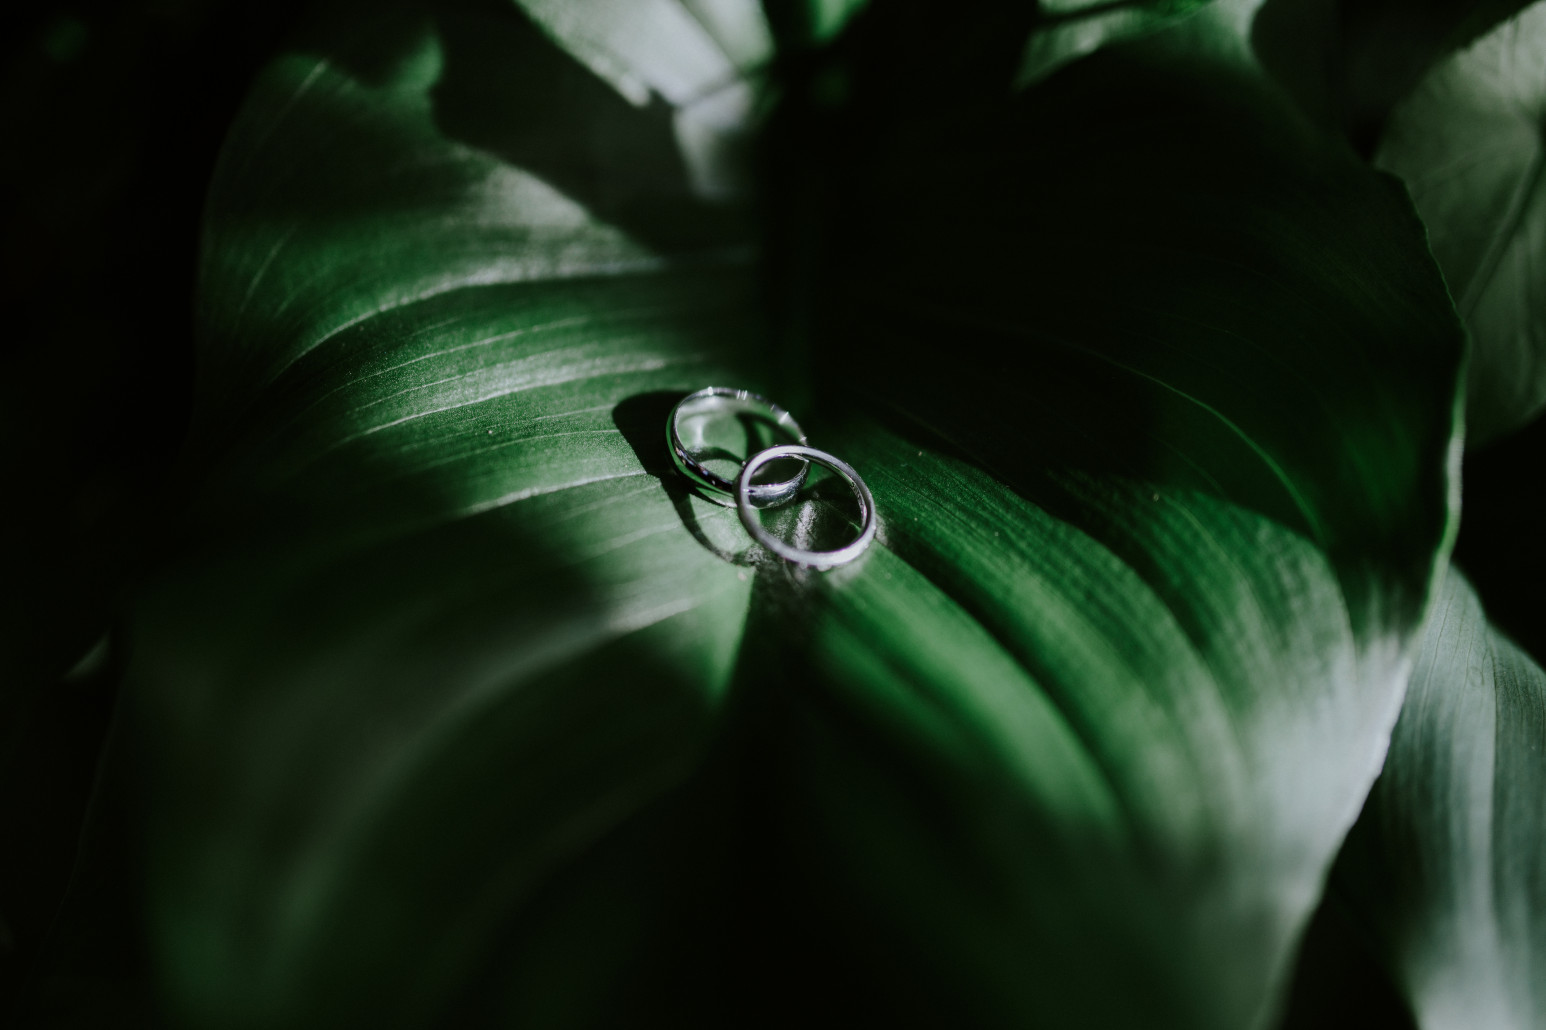 Nicole and Vlad's rings resting on a leaf at Cannon Beach, OR. Elopement wedding photography at Cannon Beach by Sienna Plus Josh.